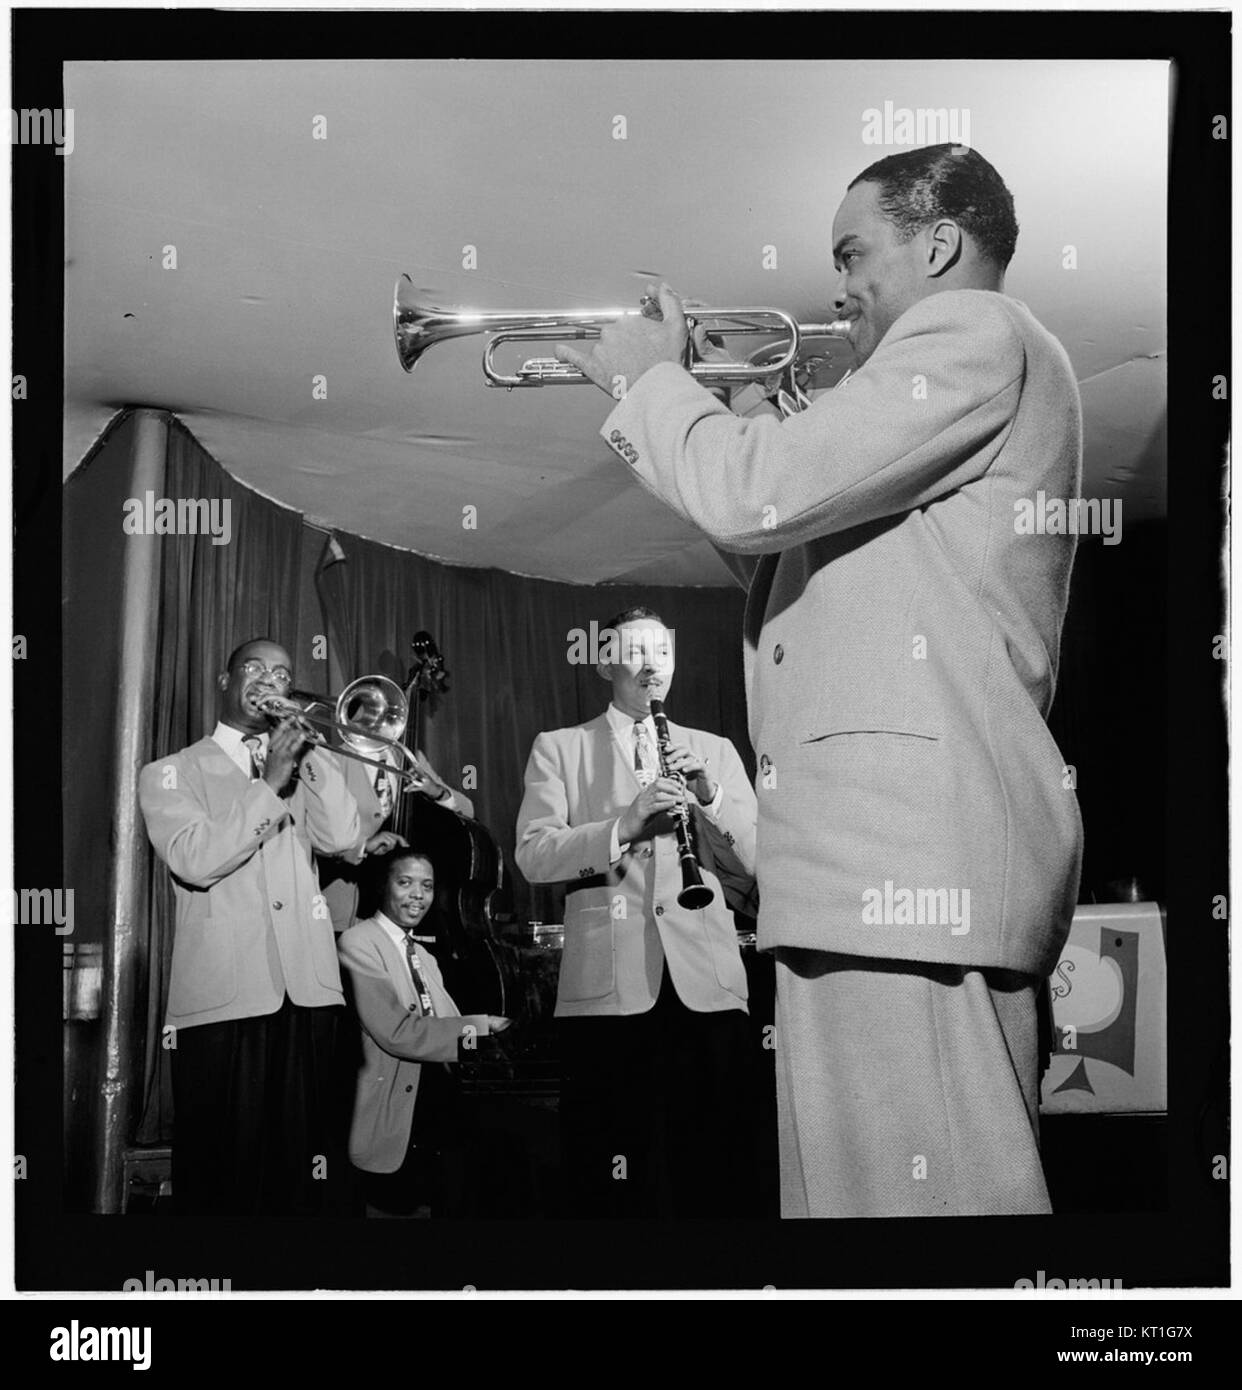 Buck Clayton avec Ted Kelly, Kenny Kersey, Benny Fonville Scoville, Toby Browne, Cafe Society (centre-ville), New York, N.Y., ca. Juin 1947 (William P. Gottlieb 01391) Banque D'Images